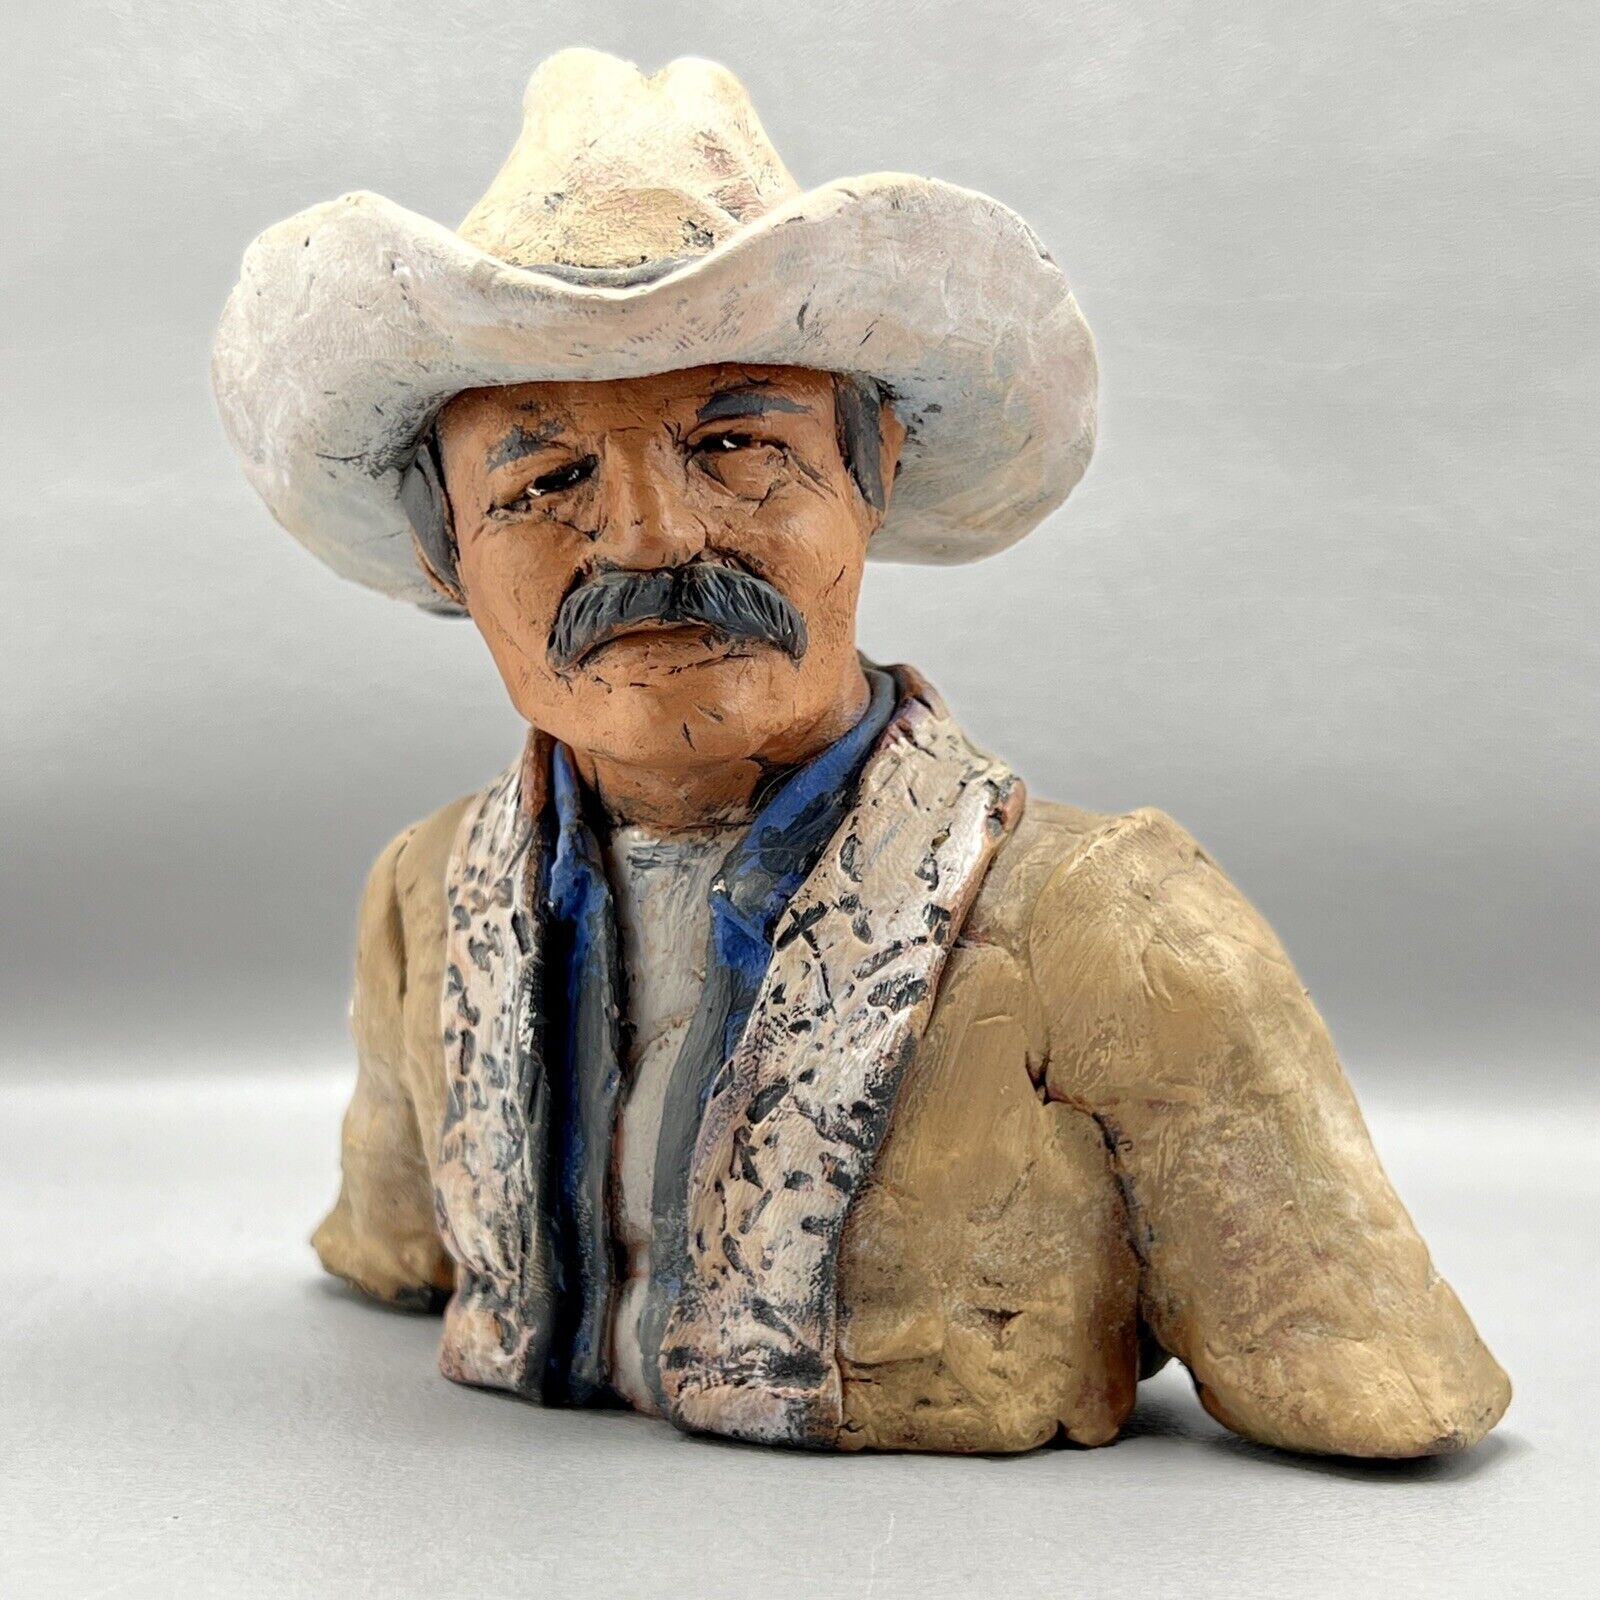 Early Vintage 5.5” Hand Sculpted Clay Cowboy Sculpture James P. Regimbal 1976